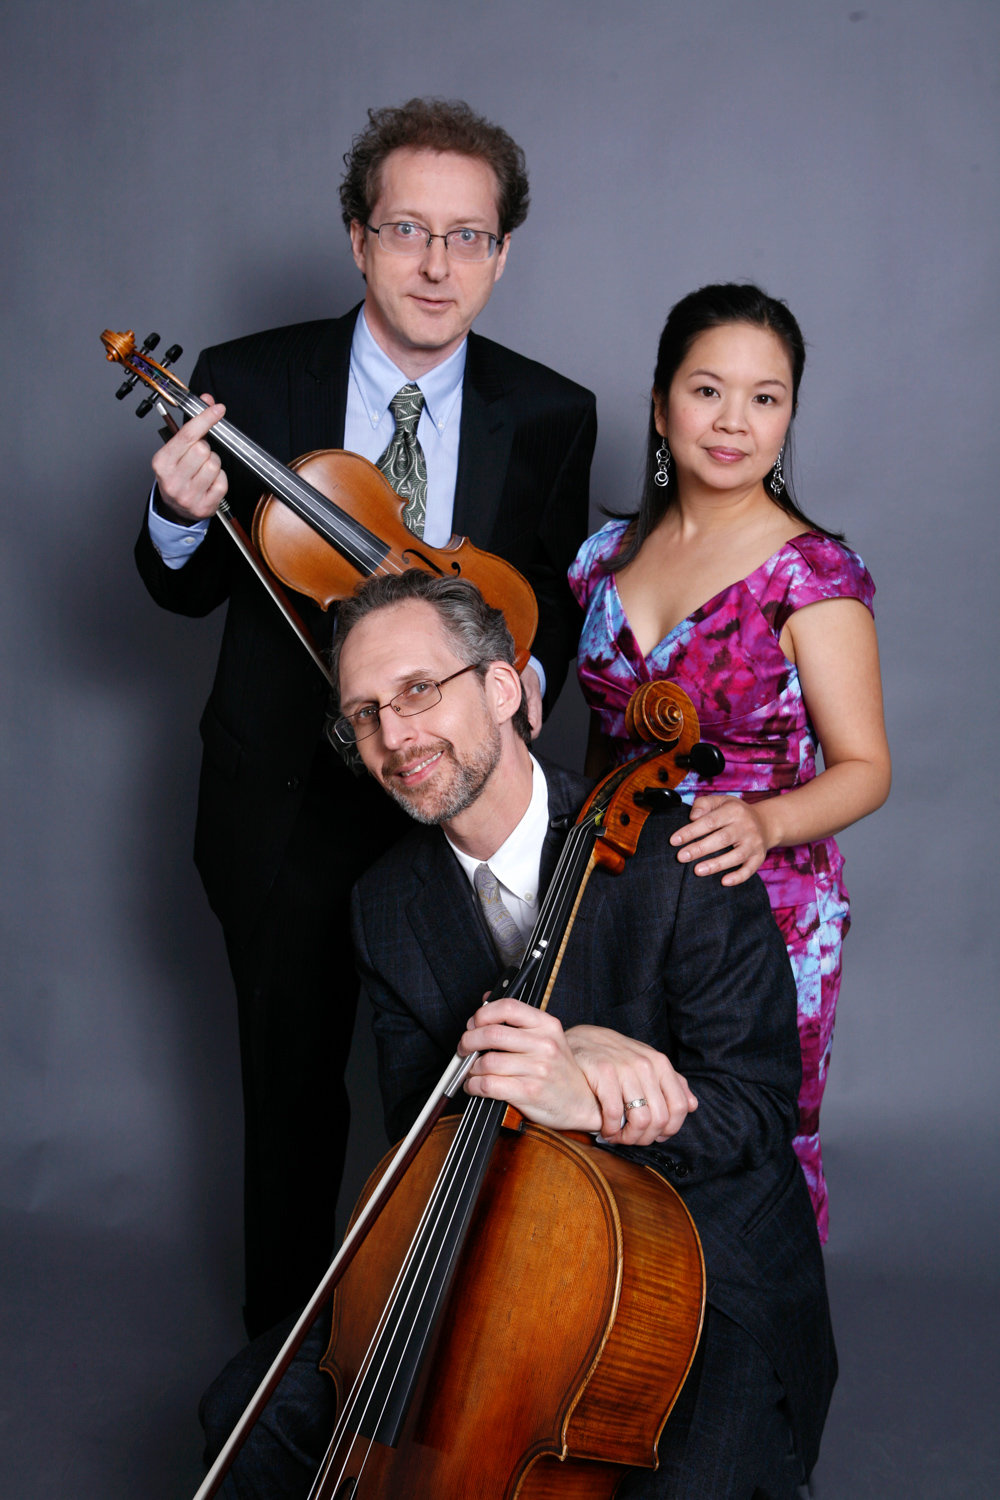 The di.vi.sion trio will bring its classical music stylings to the Riverdale-Yonkers Society for Ethical Culture on Dec. 1.